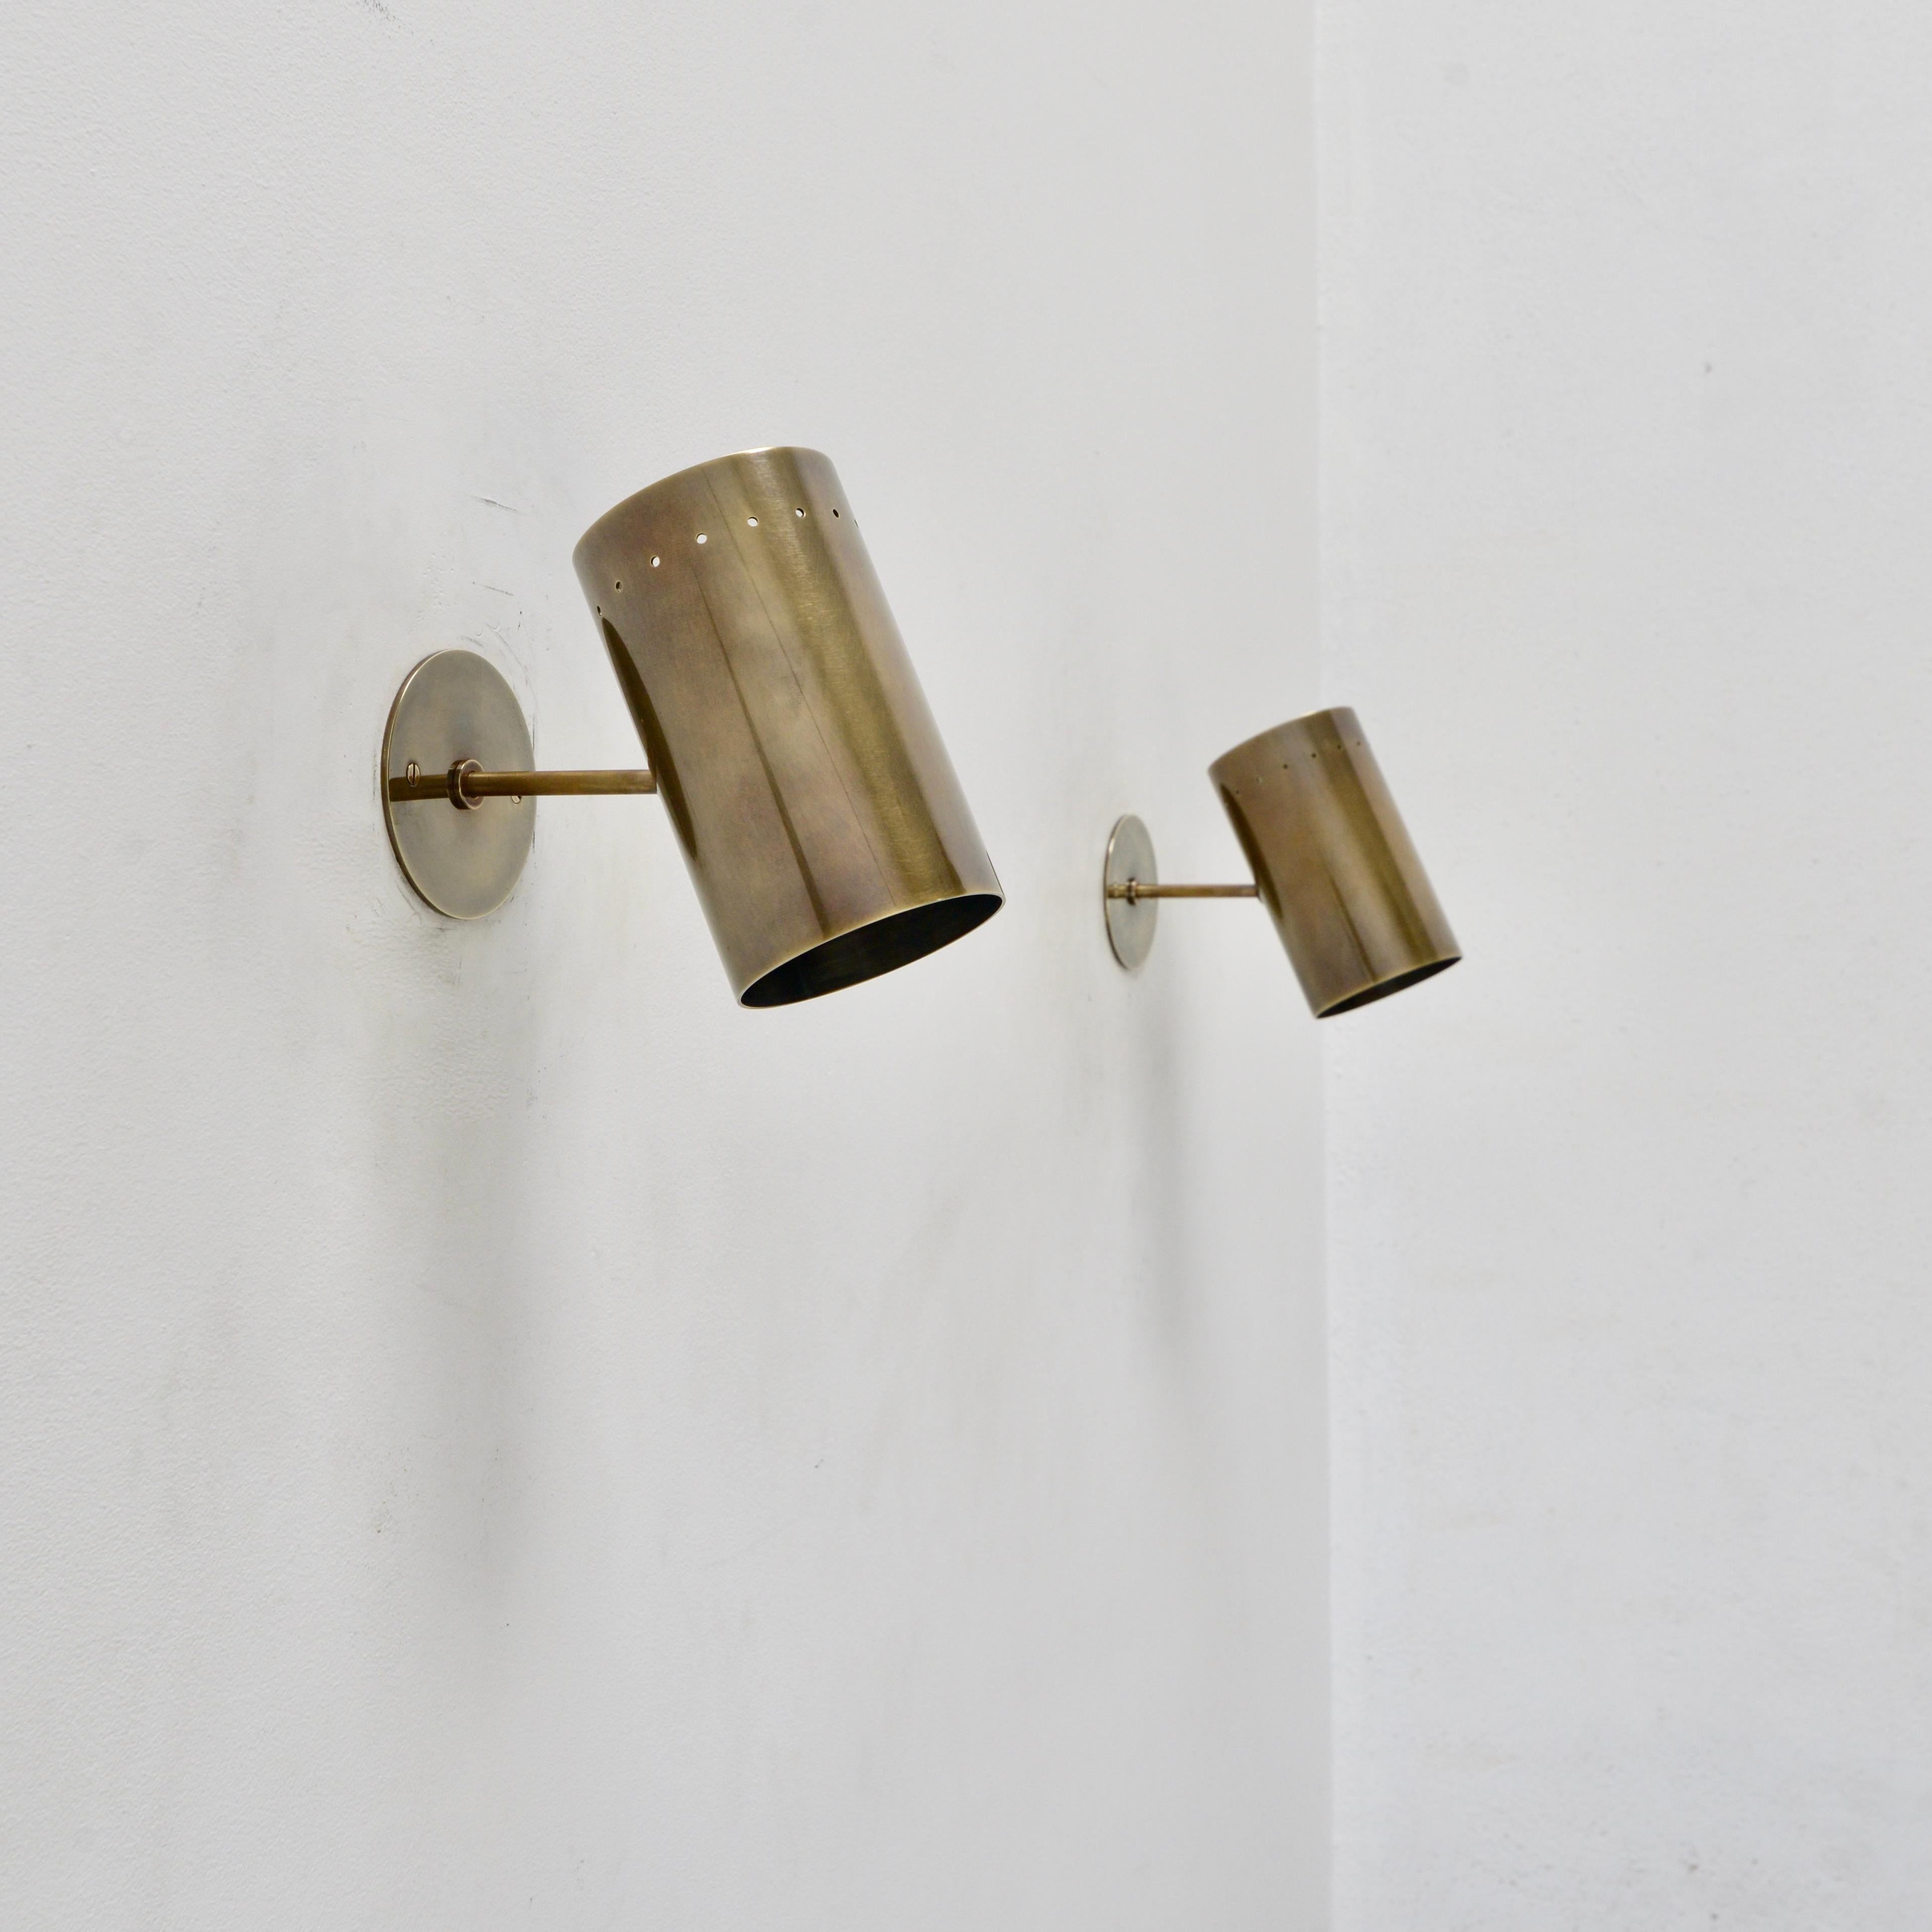 Part of our Lumfardo Luminaires contemporary collection, this LUbular perforated all-brass sconce is a directional reading sconce in a patina brass finish. Single E26 based socket per sconce. Maximum wattage 75 watts per sconce. 4” Back plate has 2